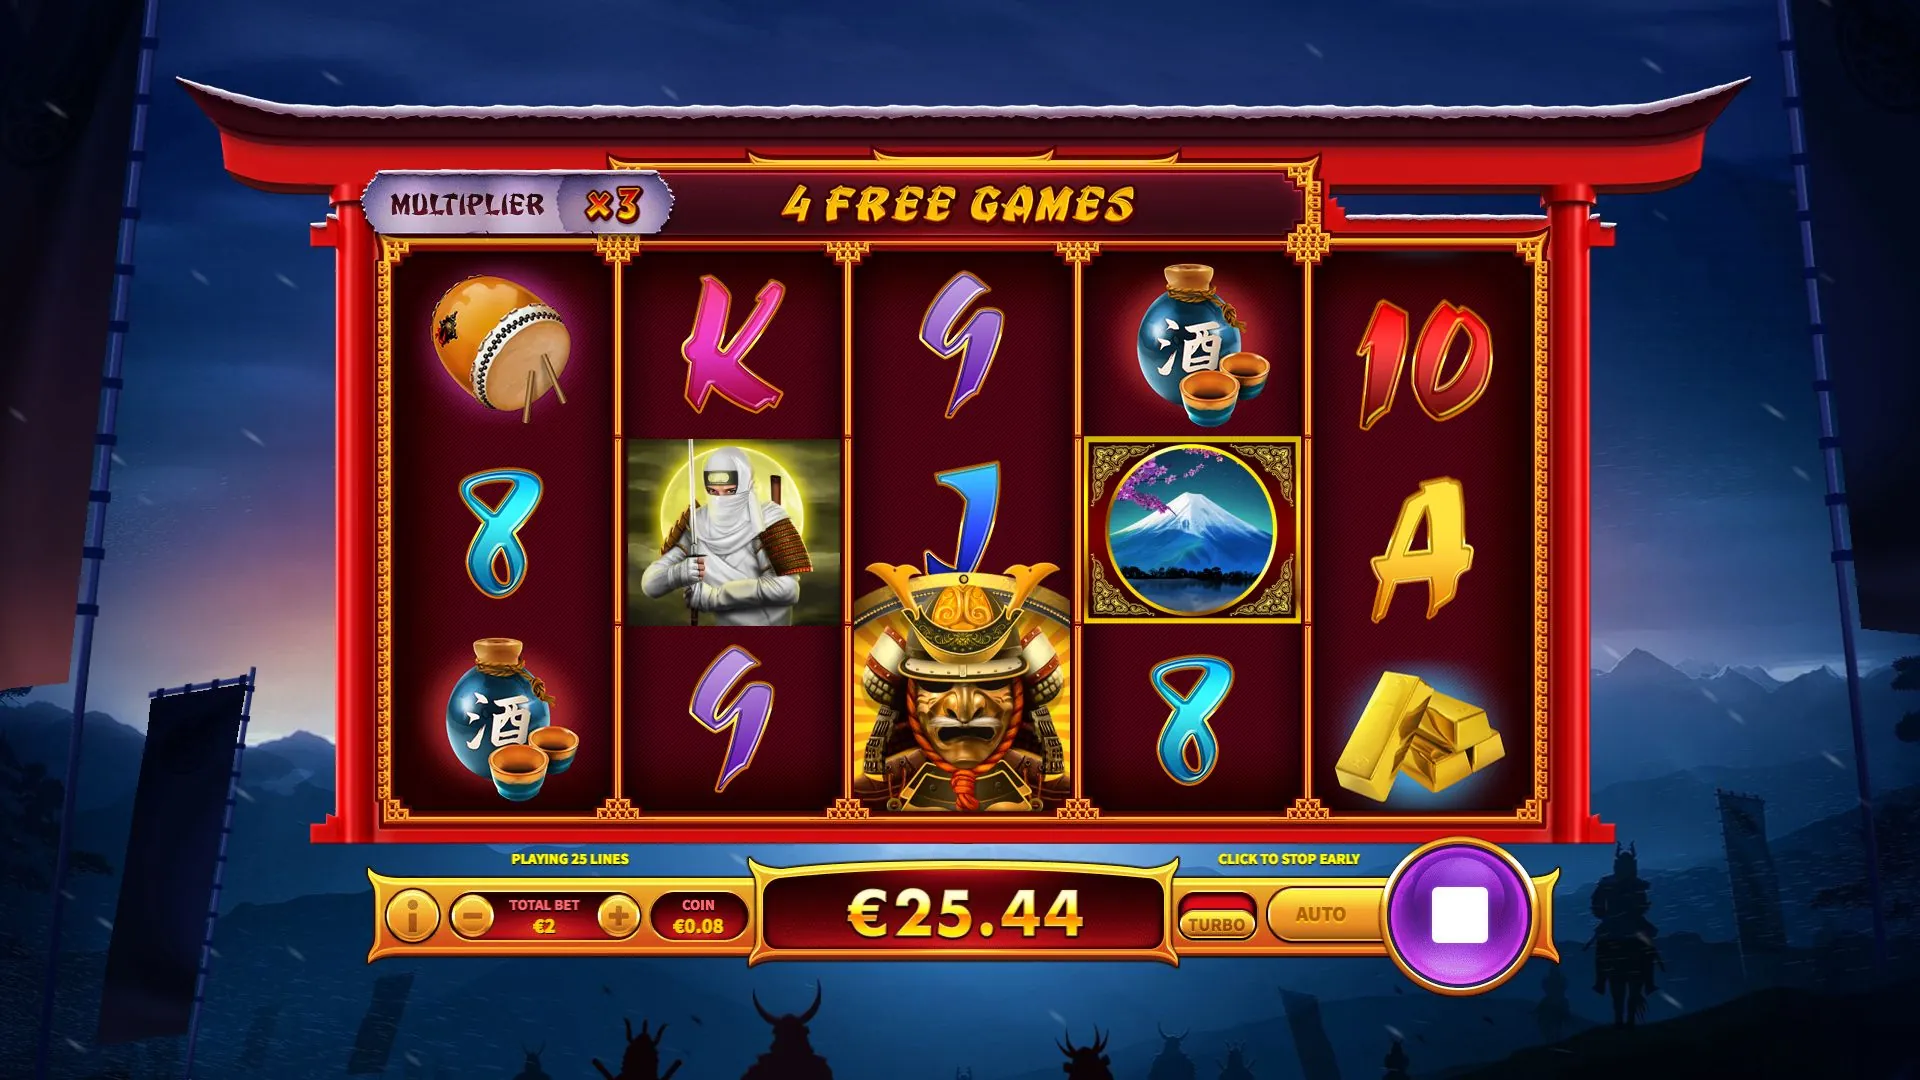 Free Games with Multipliers